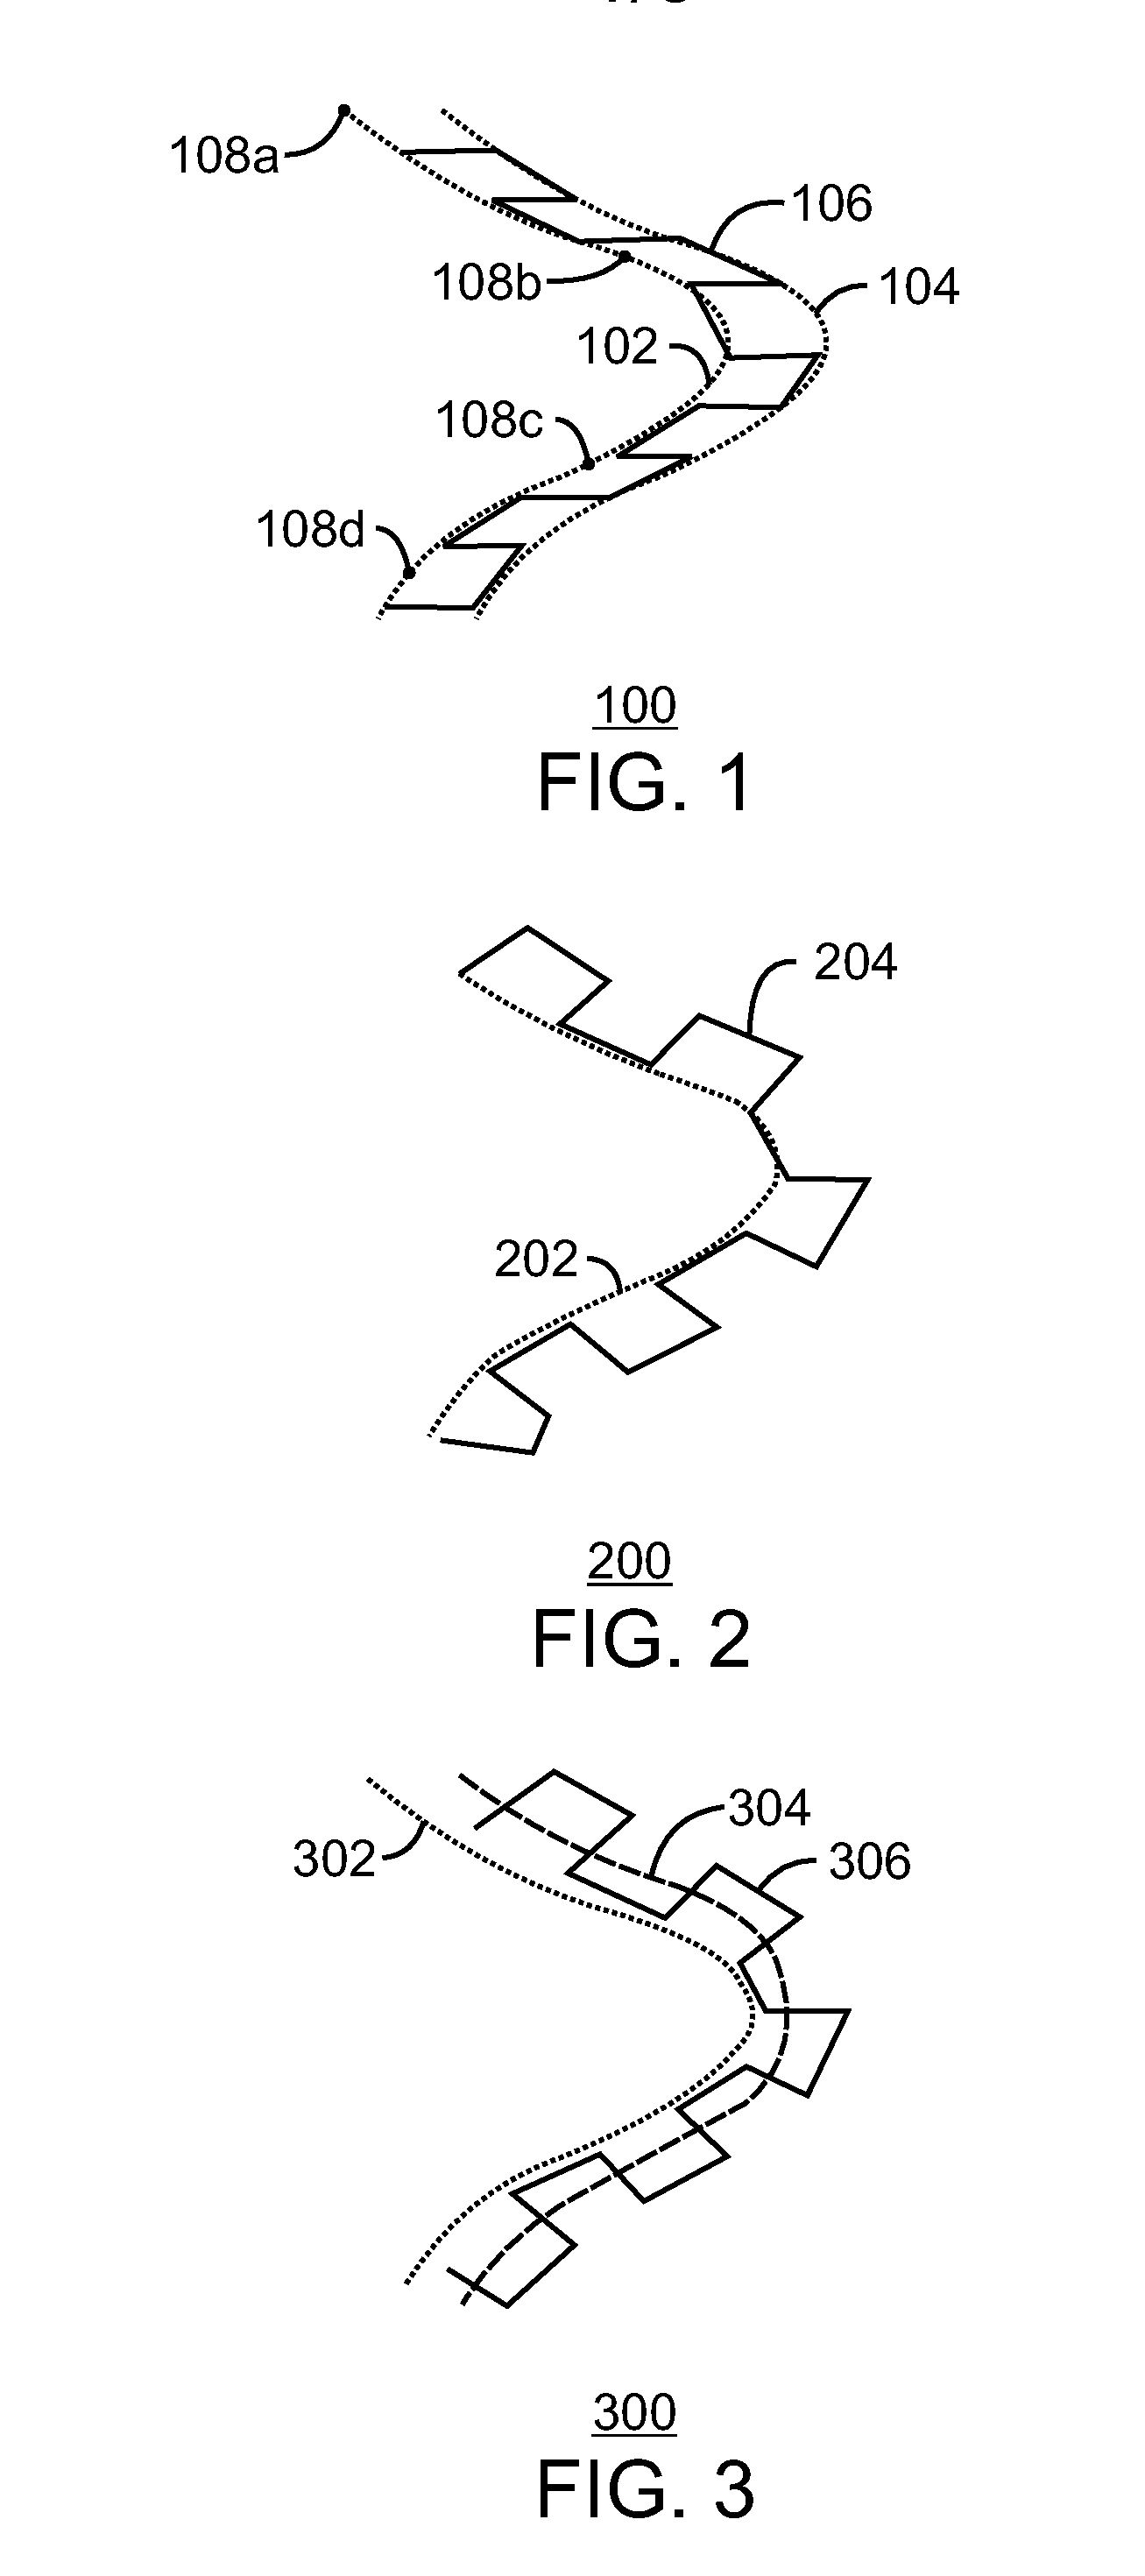 System and Method For Visualizing Data Corresponding To Physical Objects